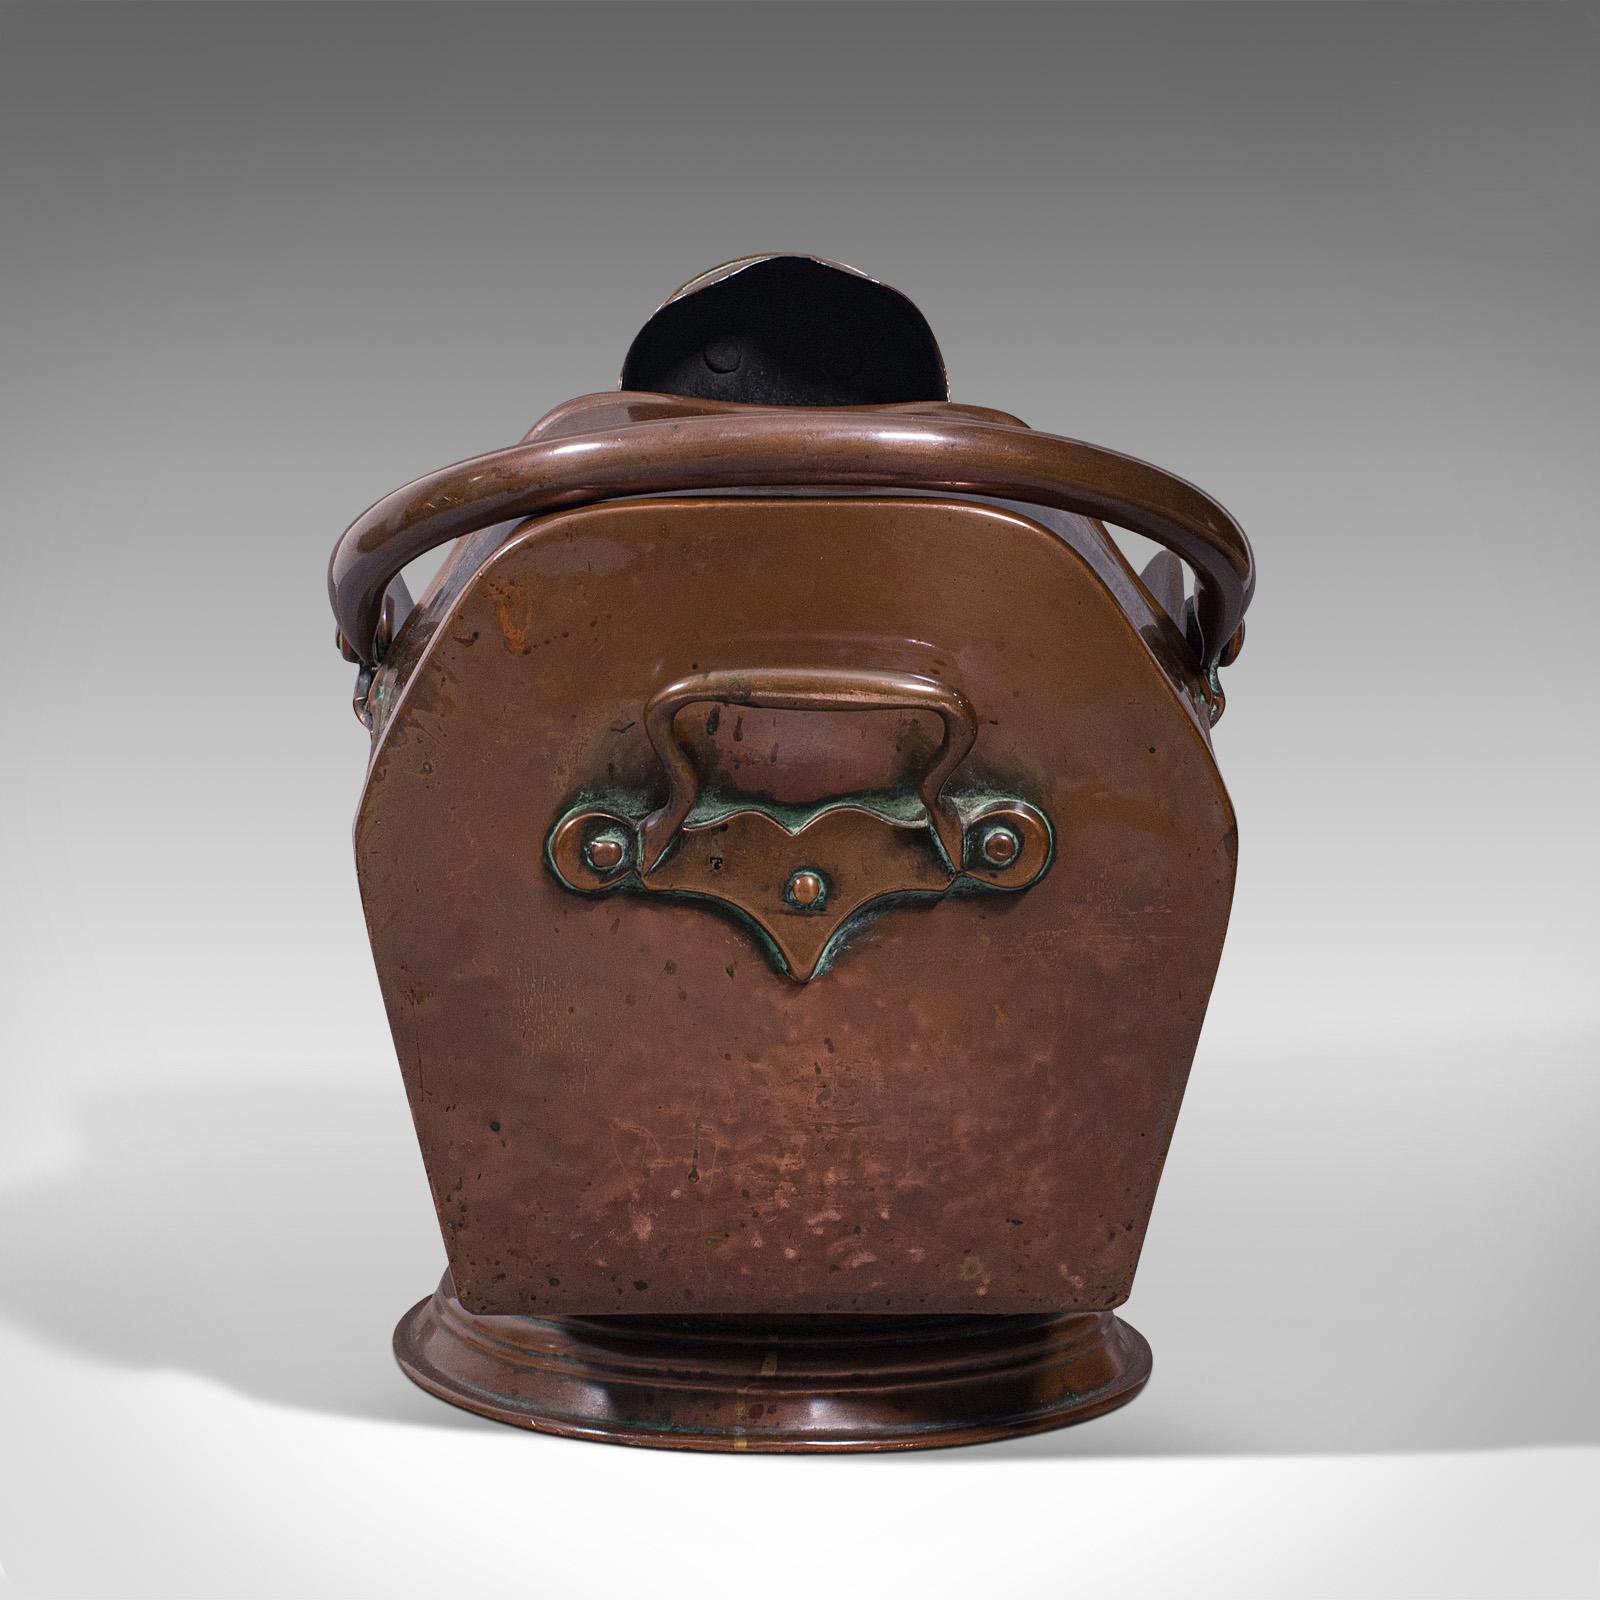 19th Century Antique Coal Scuttle, English, Copper, Fireside Bucket, Scoop, Victorian, C.1880 For Sale